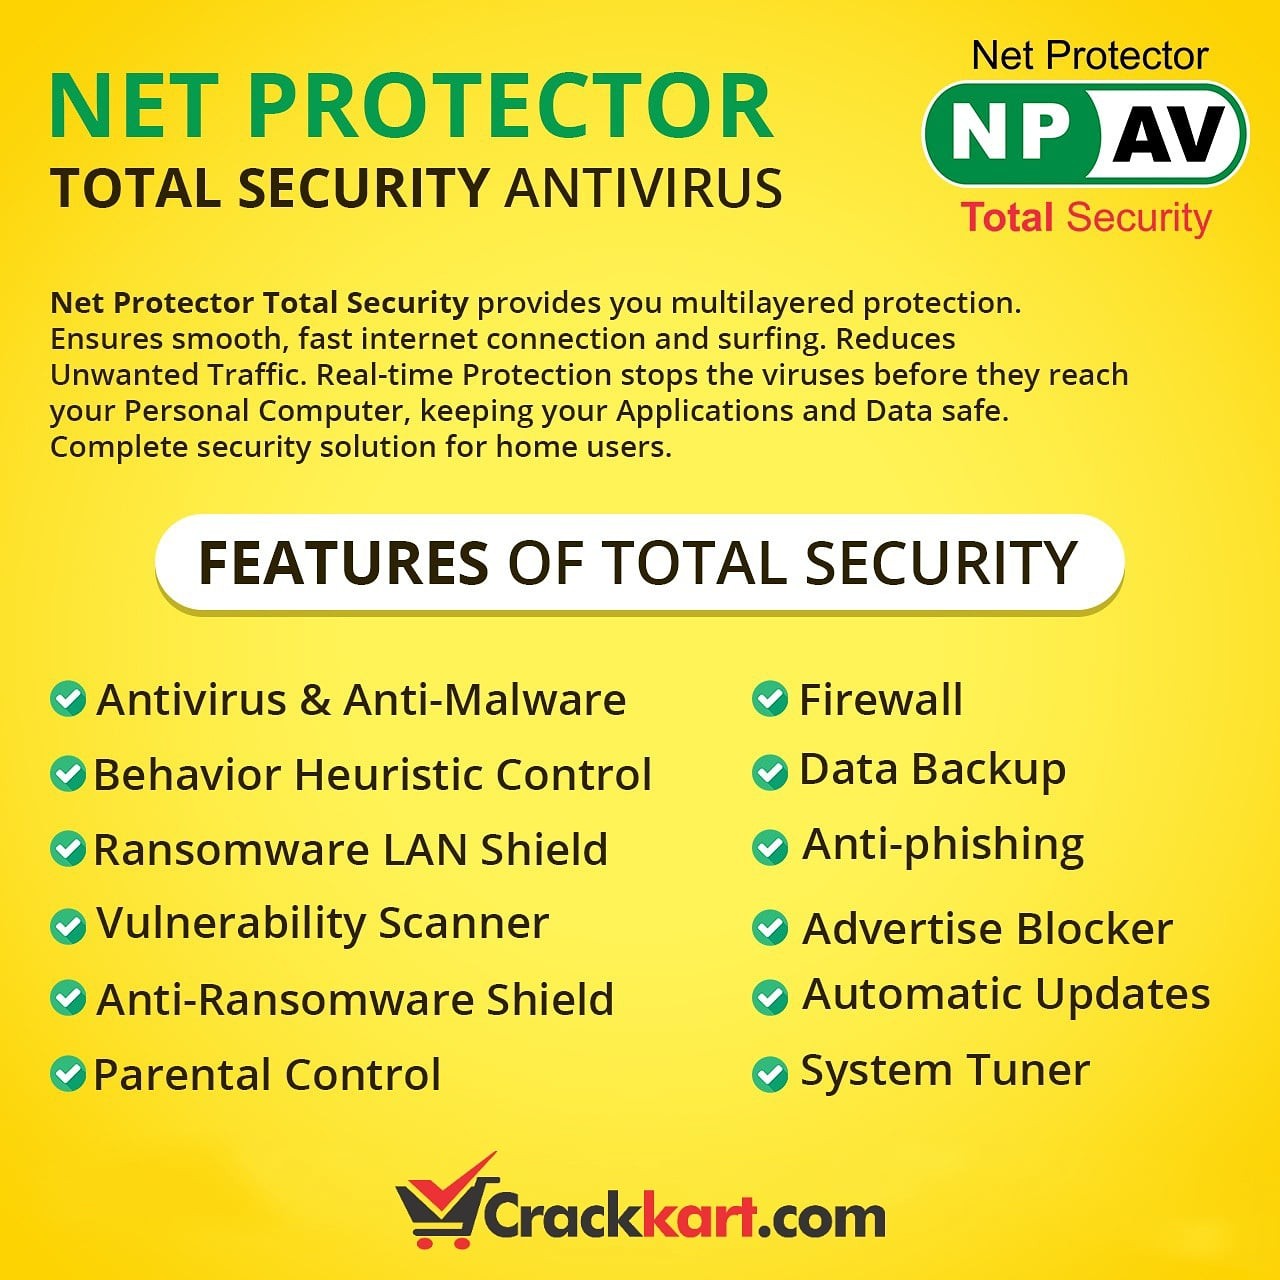  Net Protector Total Security provides you multilayered protection 